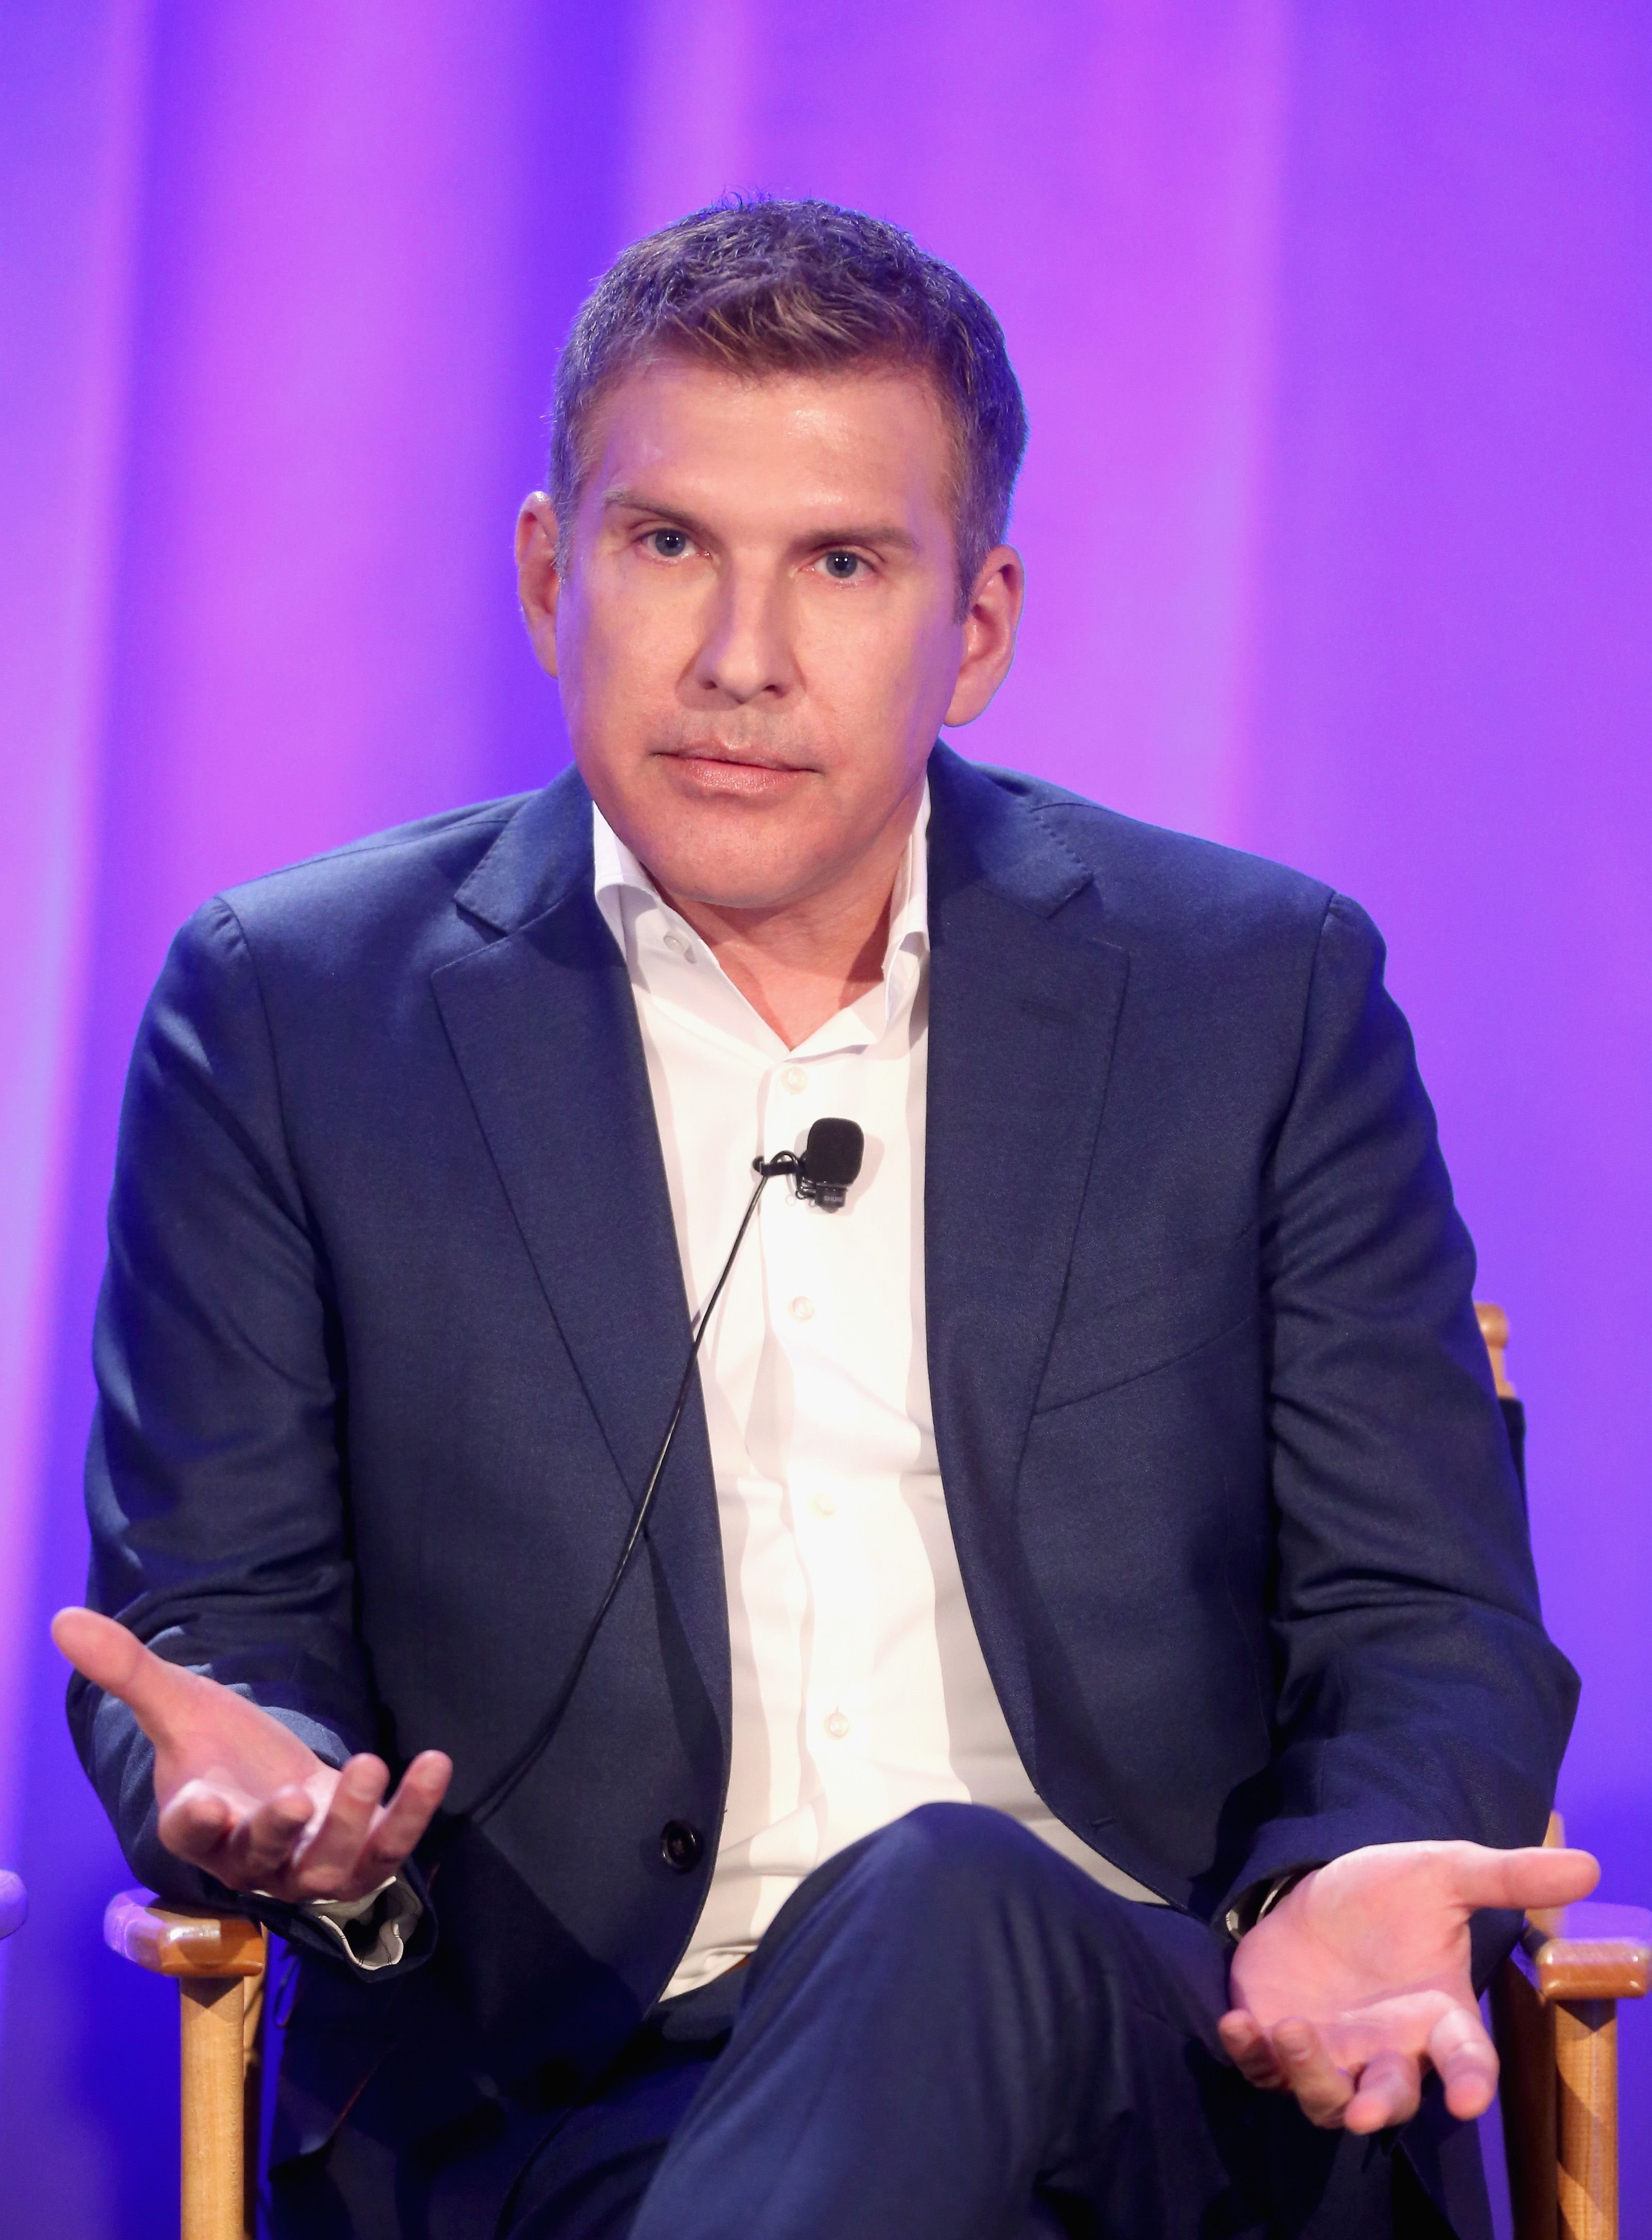 Todd Chrisley at the "Chrisley Knows Best" panel at the 2016 NBCUniversal Summer Press Day on April 1, 2016 | Photo: Getty Images